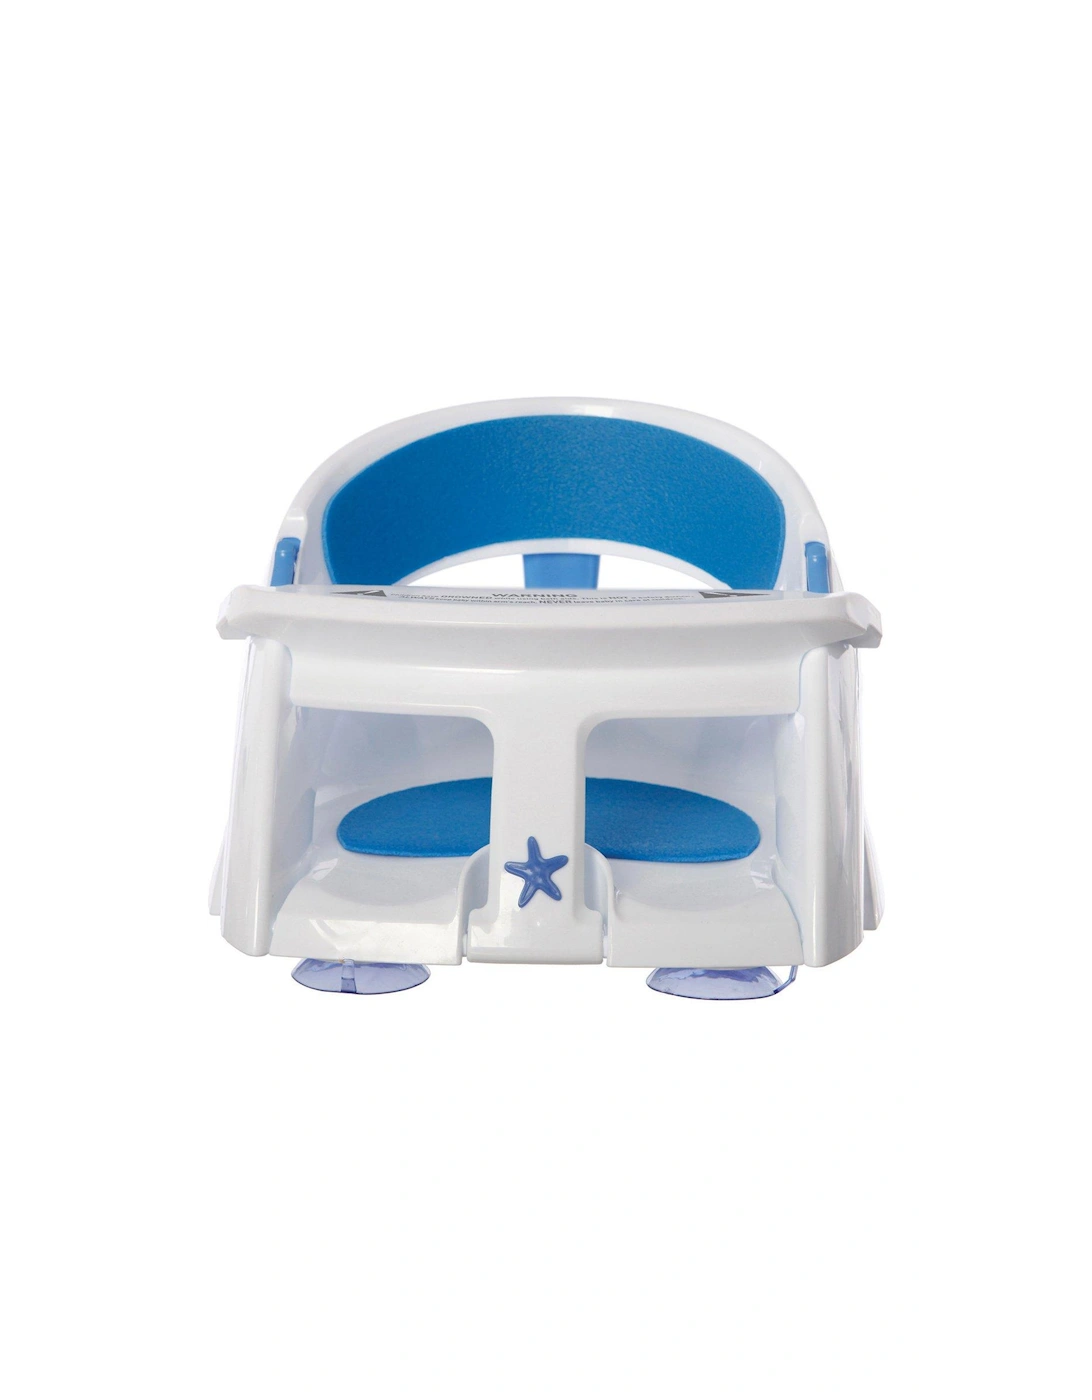 Deluxe Bath Seat with Foam Padding and Heat Sensor - Blue/White, 3 of 2